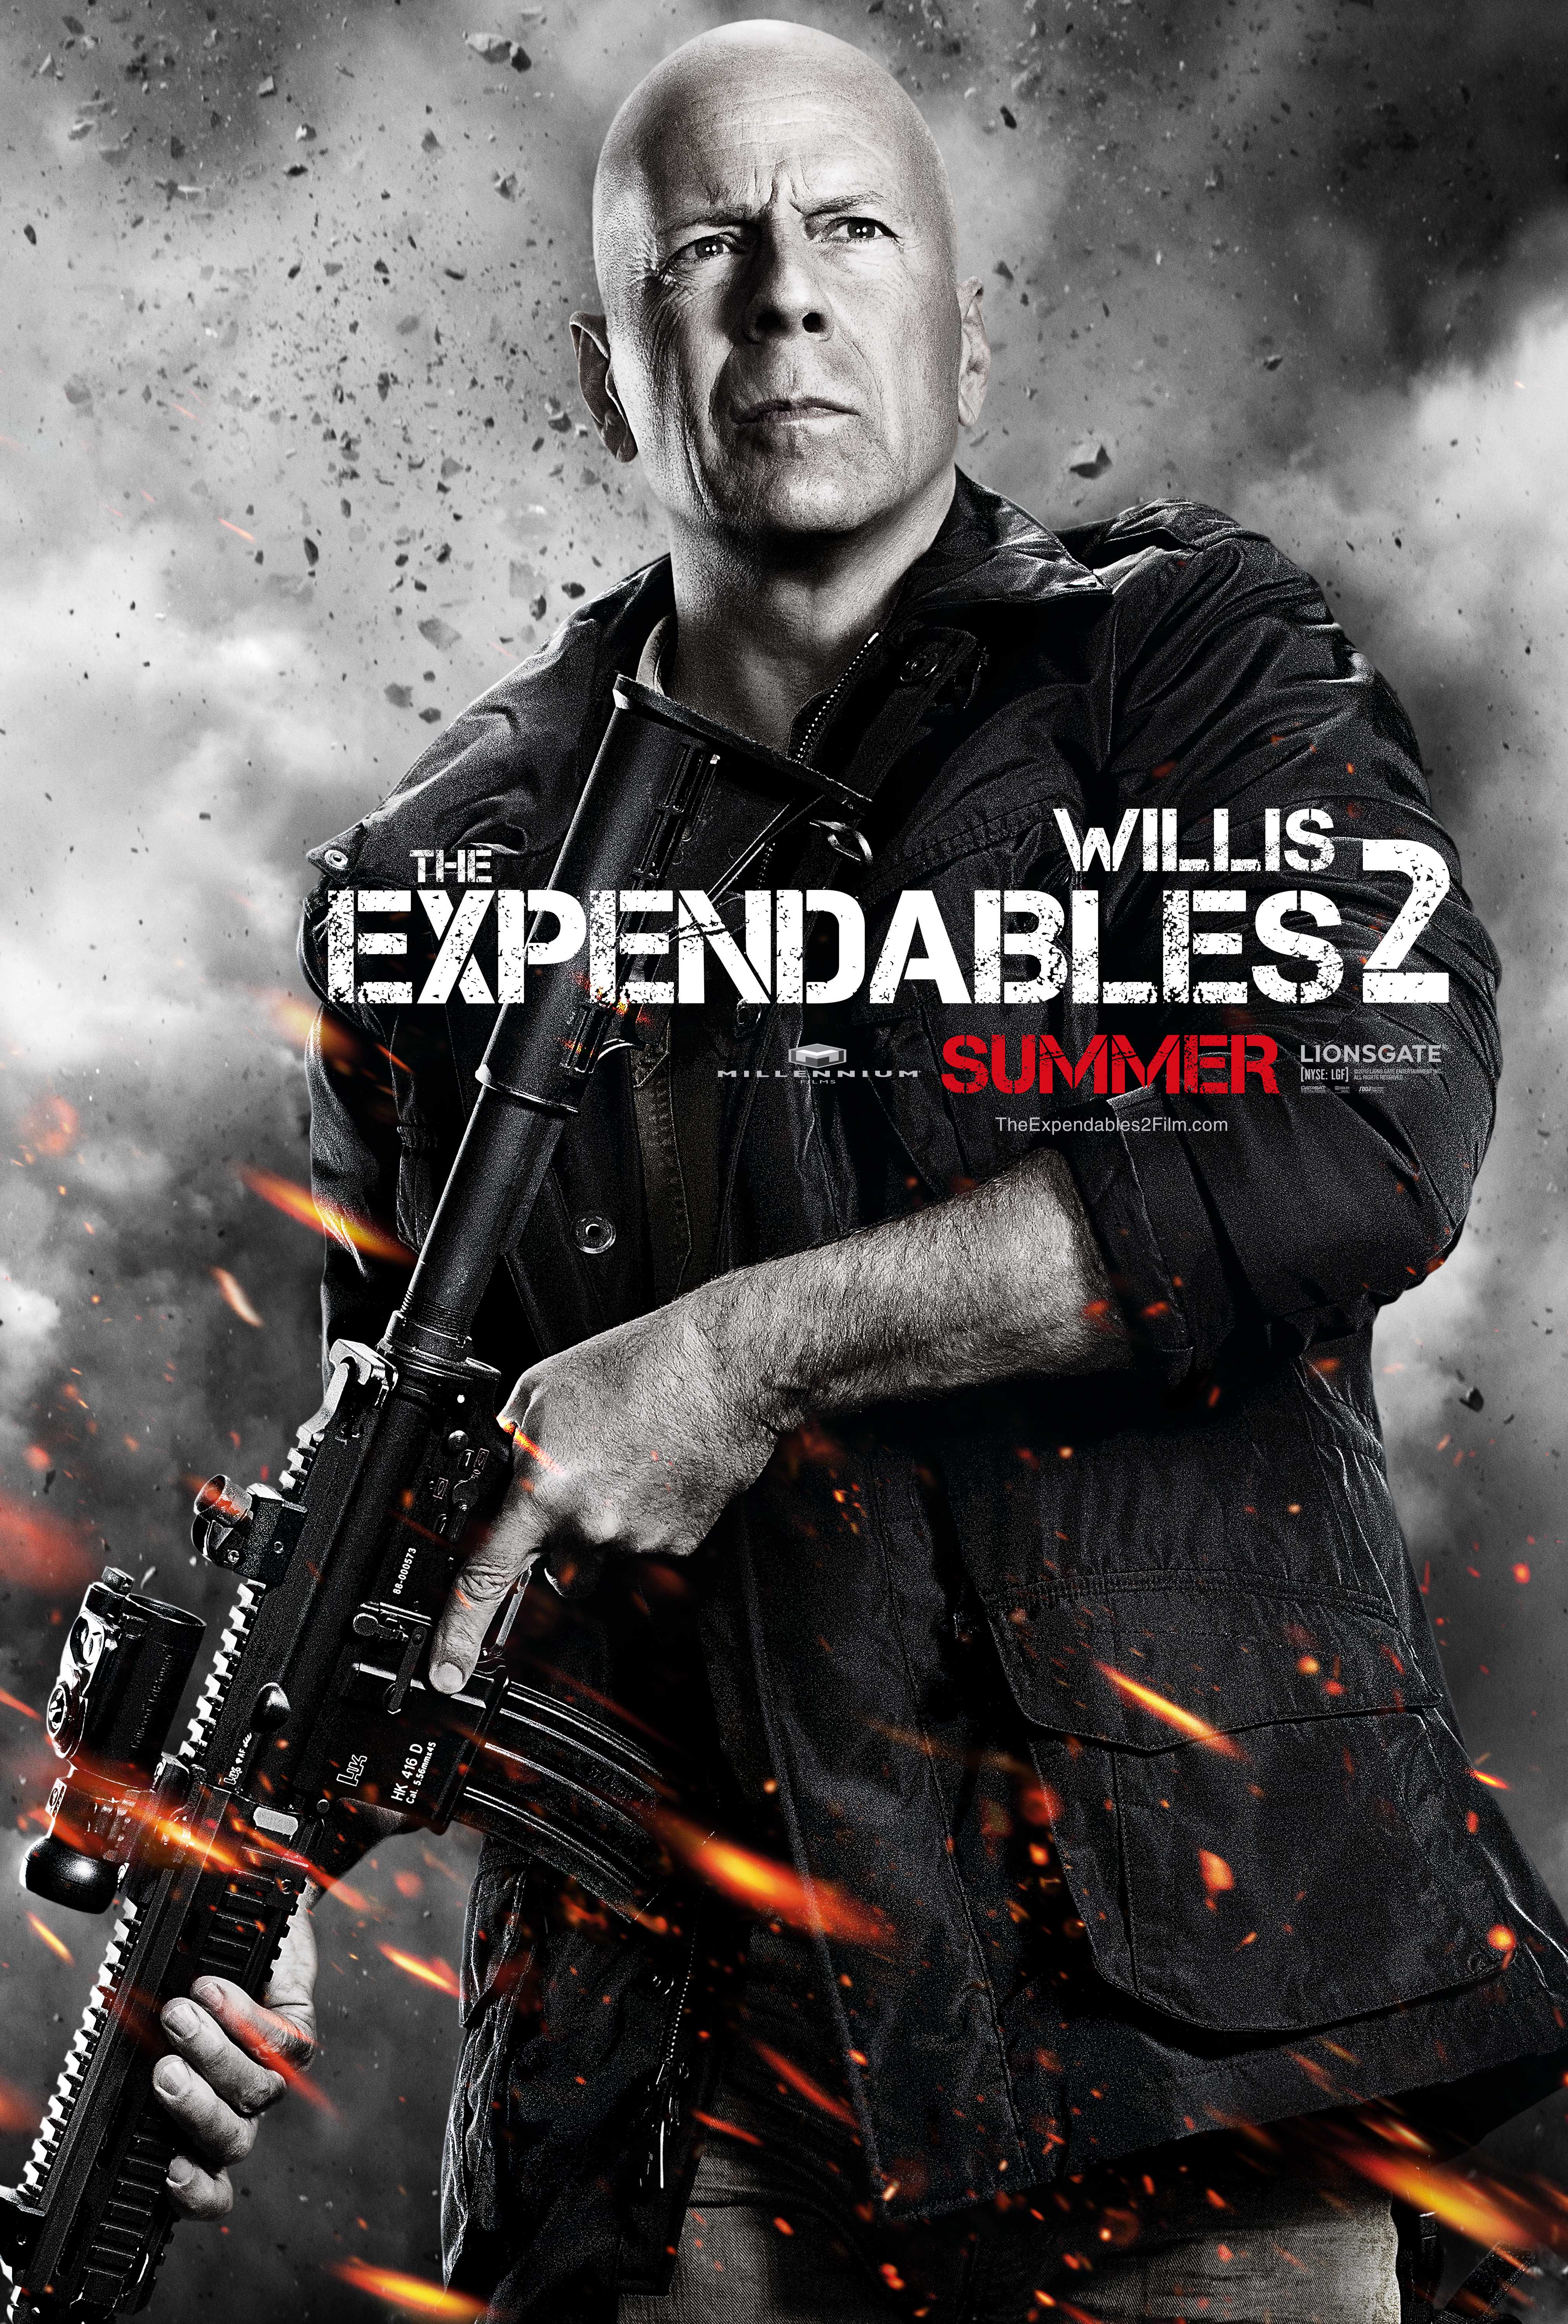 expendables-2-movie-poster-bruce-willis.jpg